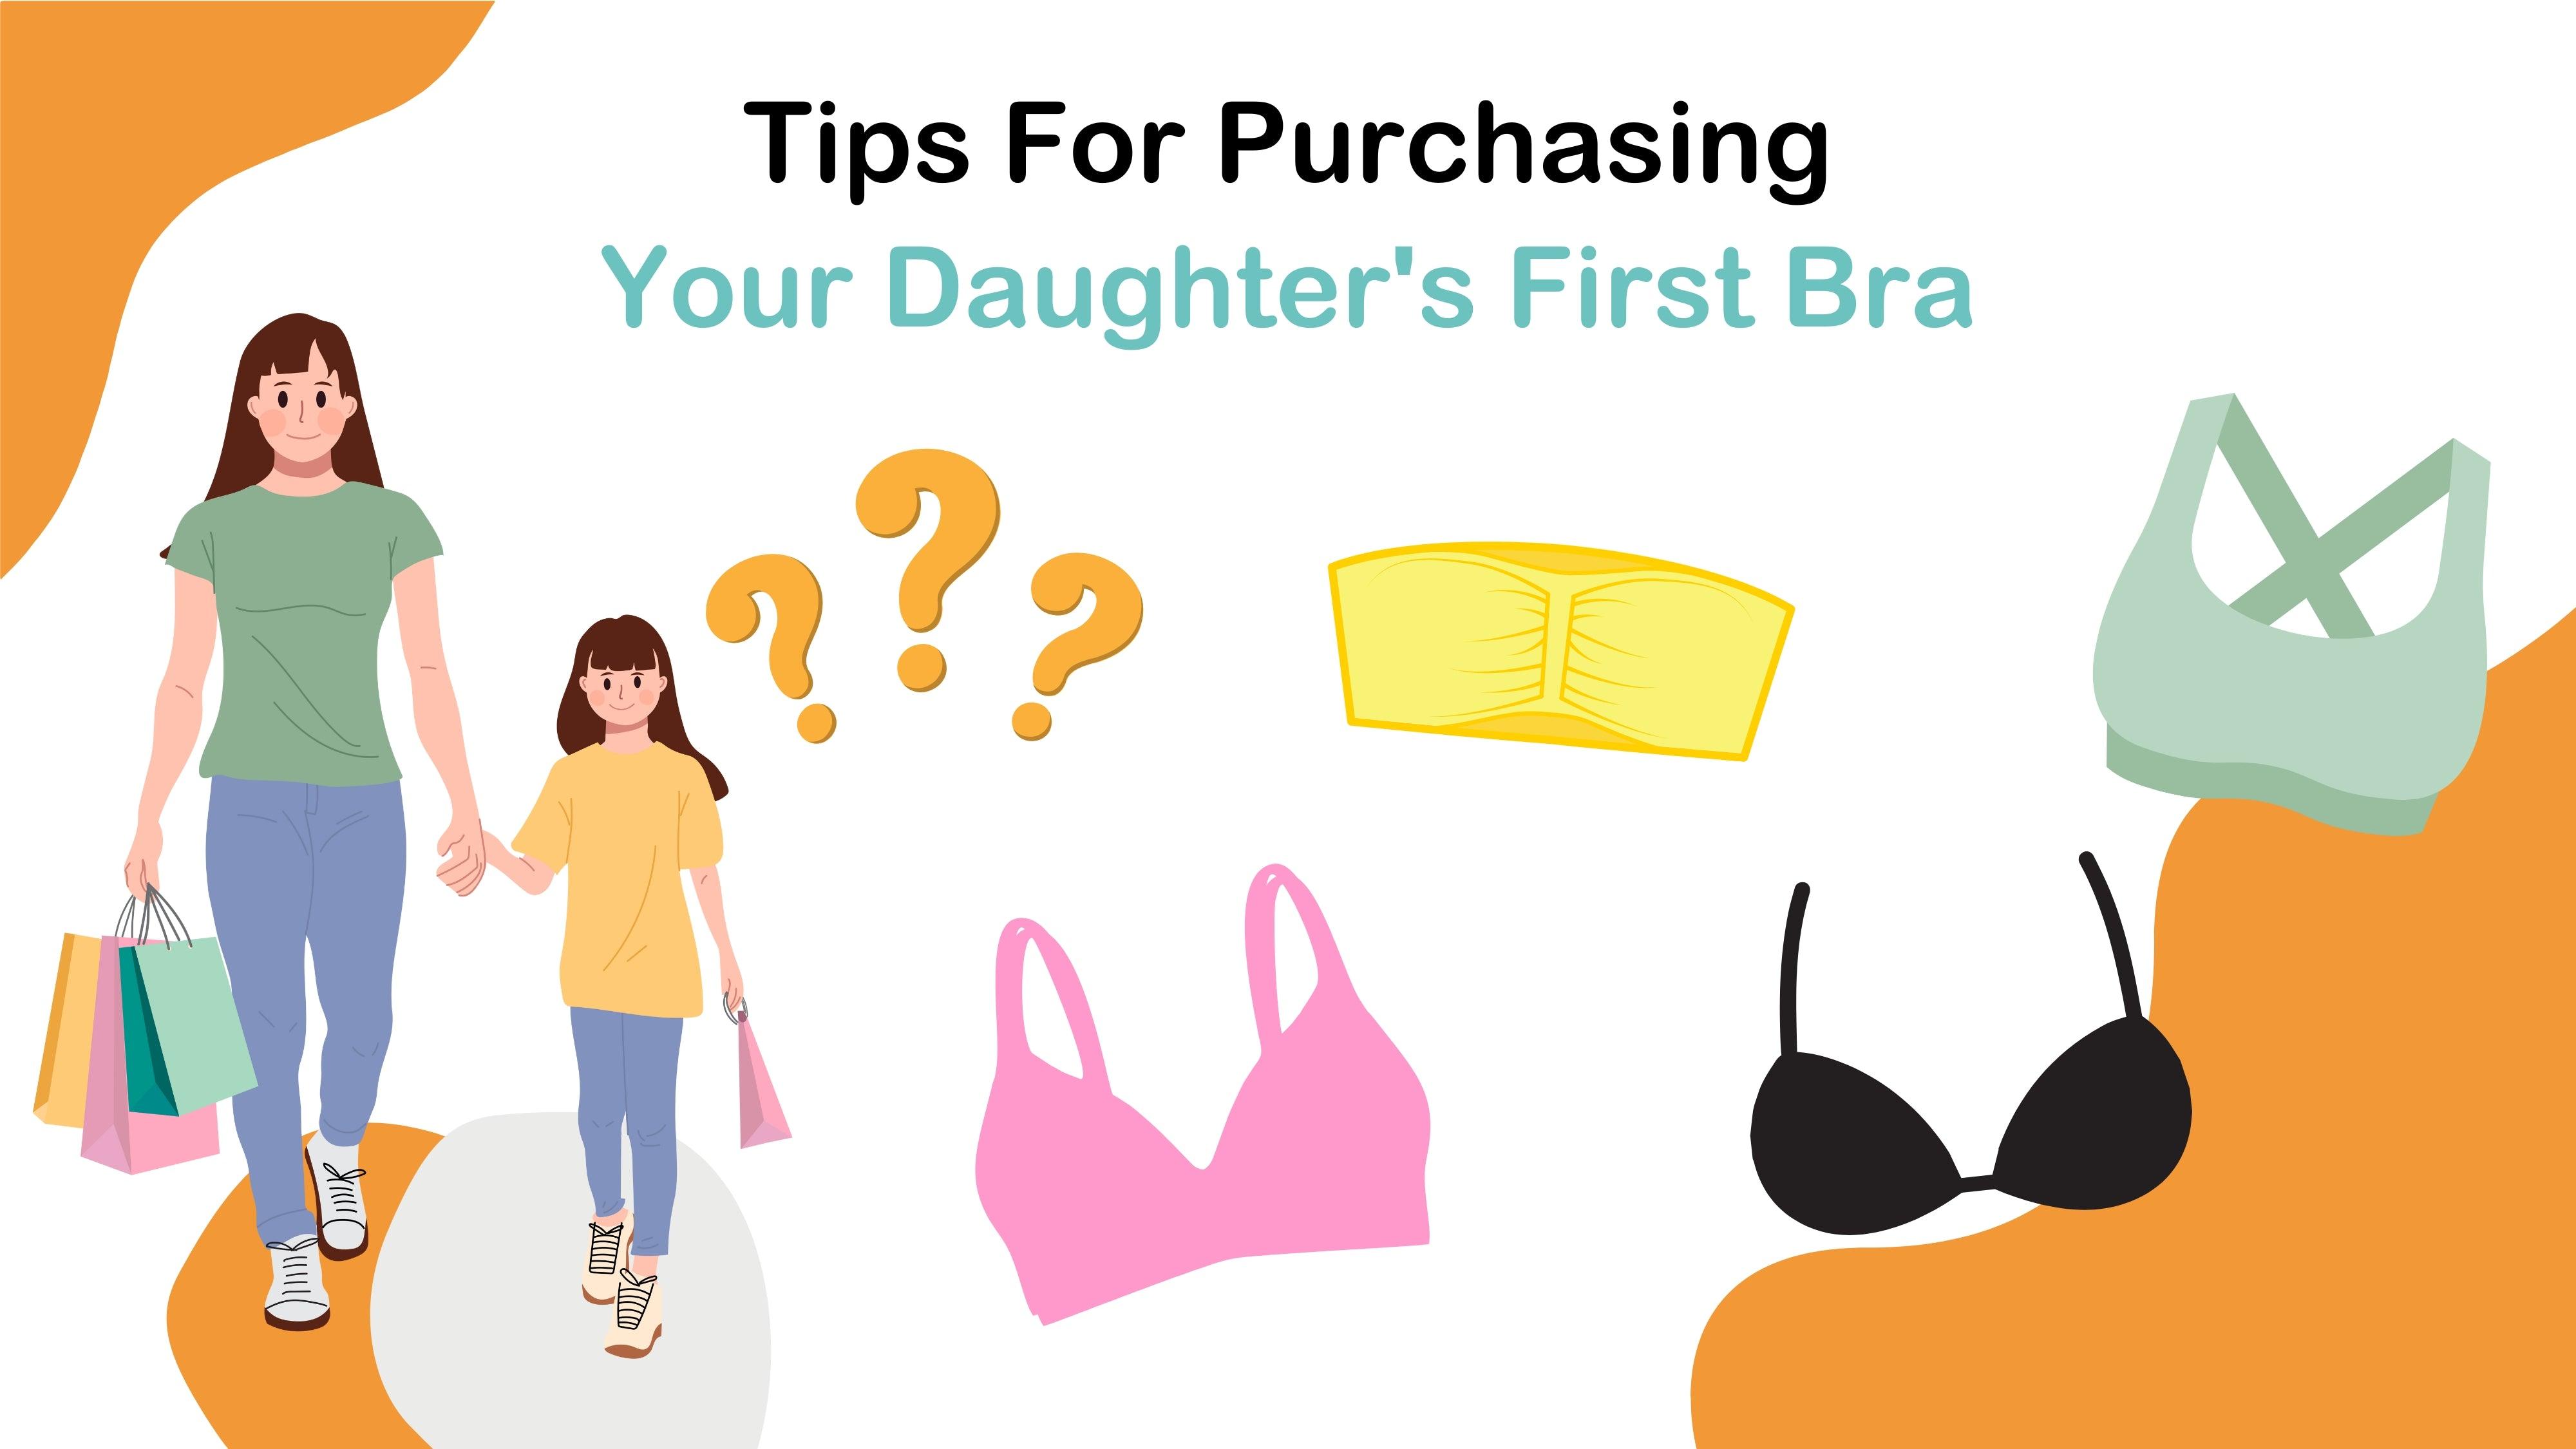 Tips to Purchase First Bra for Your Daughter